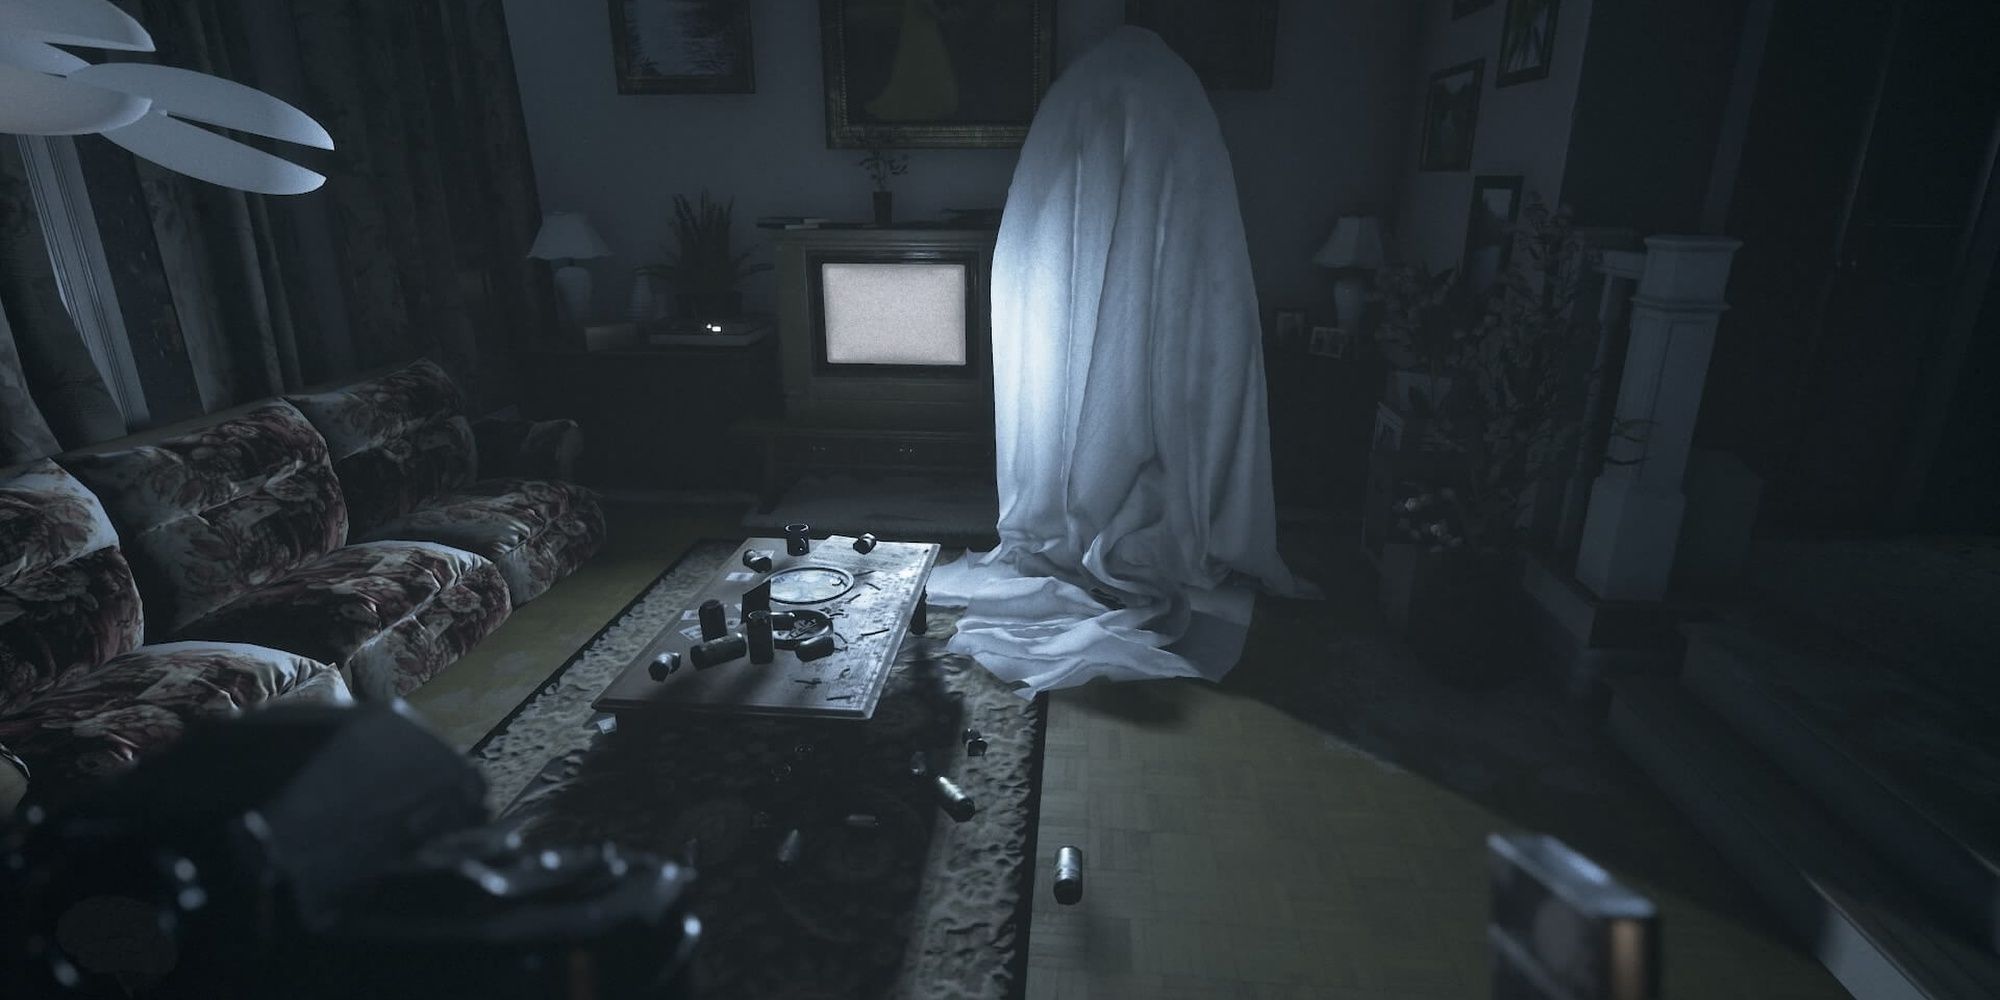 Visage: Finding The Ghost Hiding Under A Bedsheet